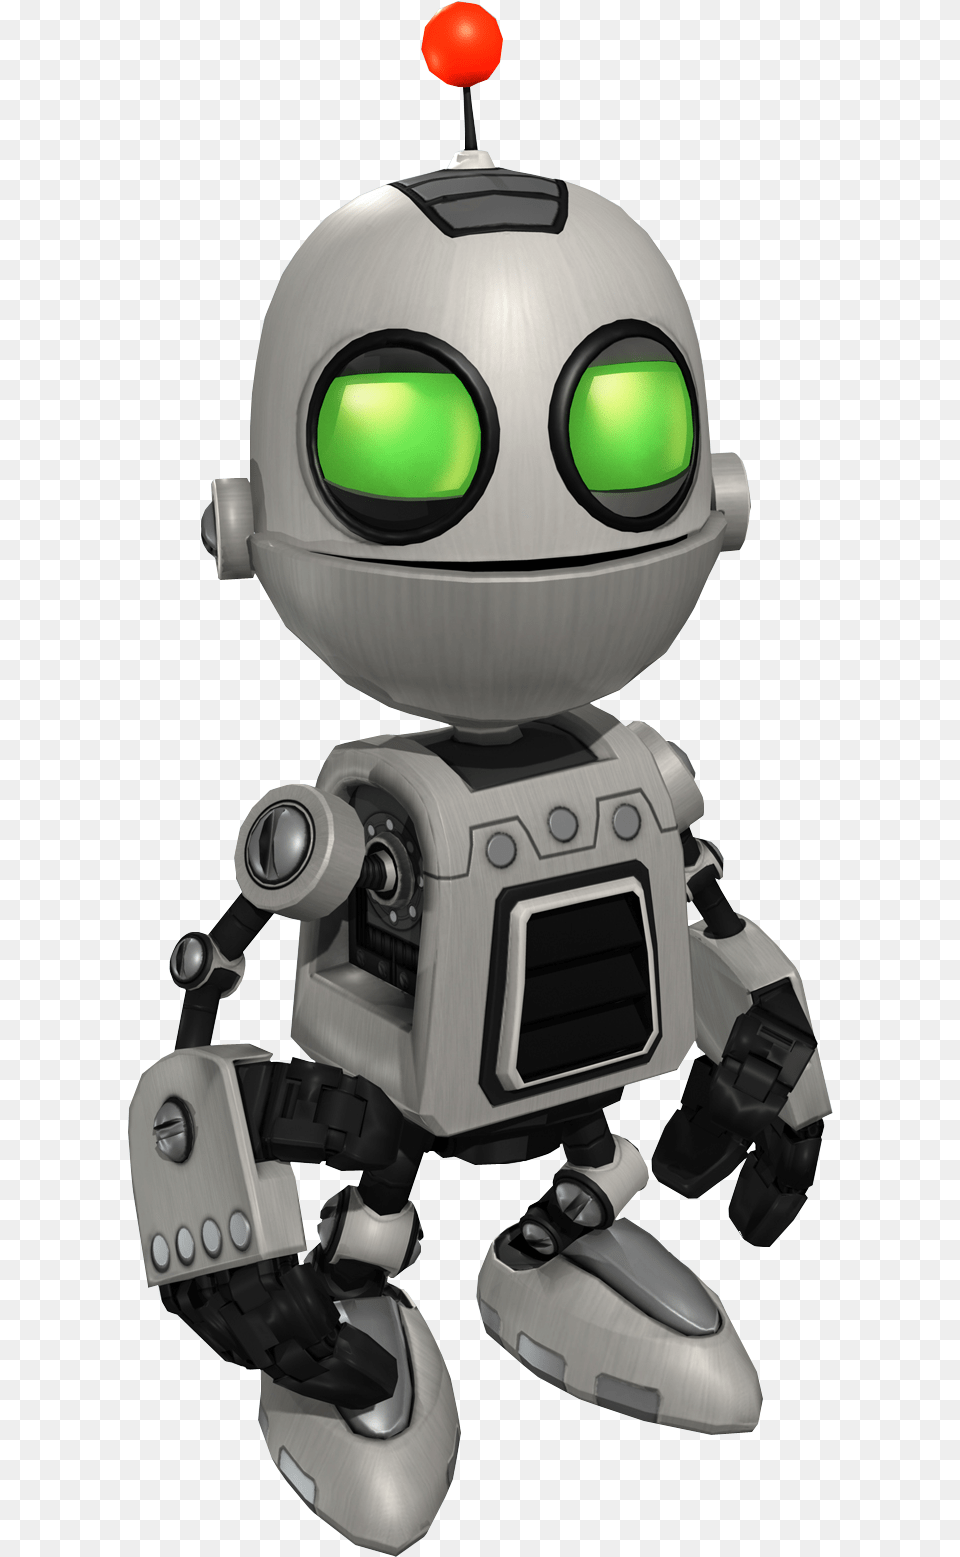 Clank Clank From Ratchet And Clank, Robot, Tape Free Transparent Png